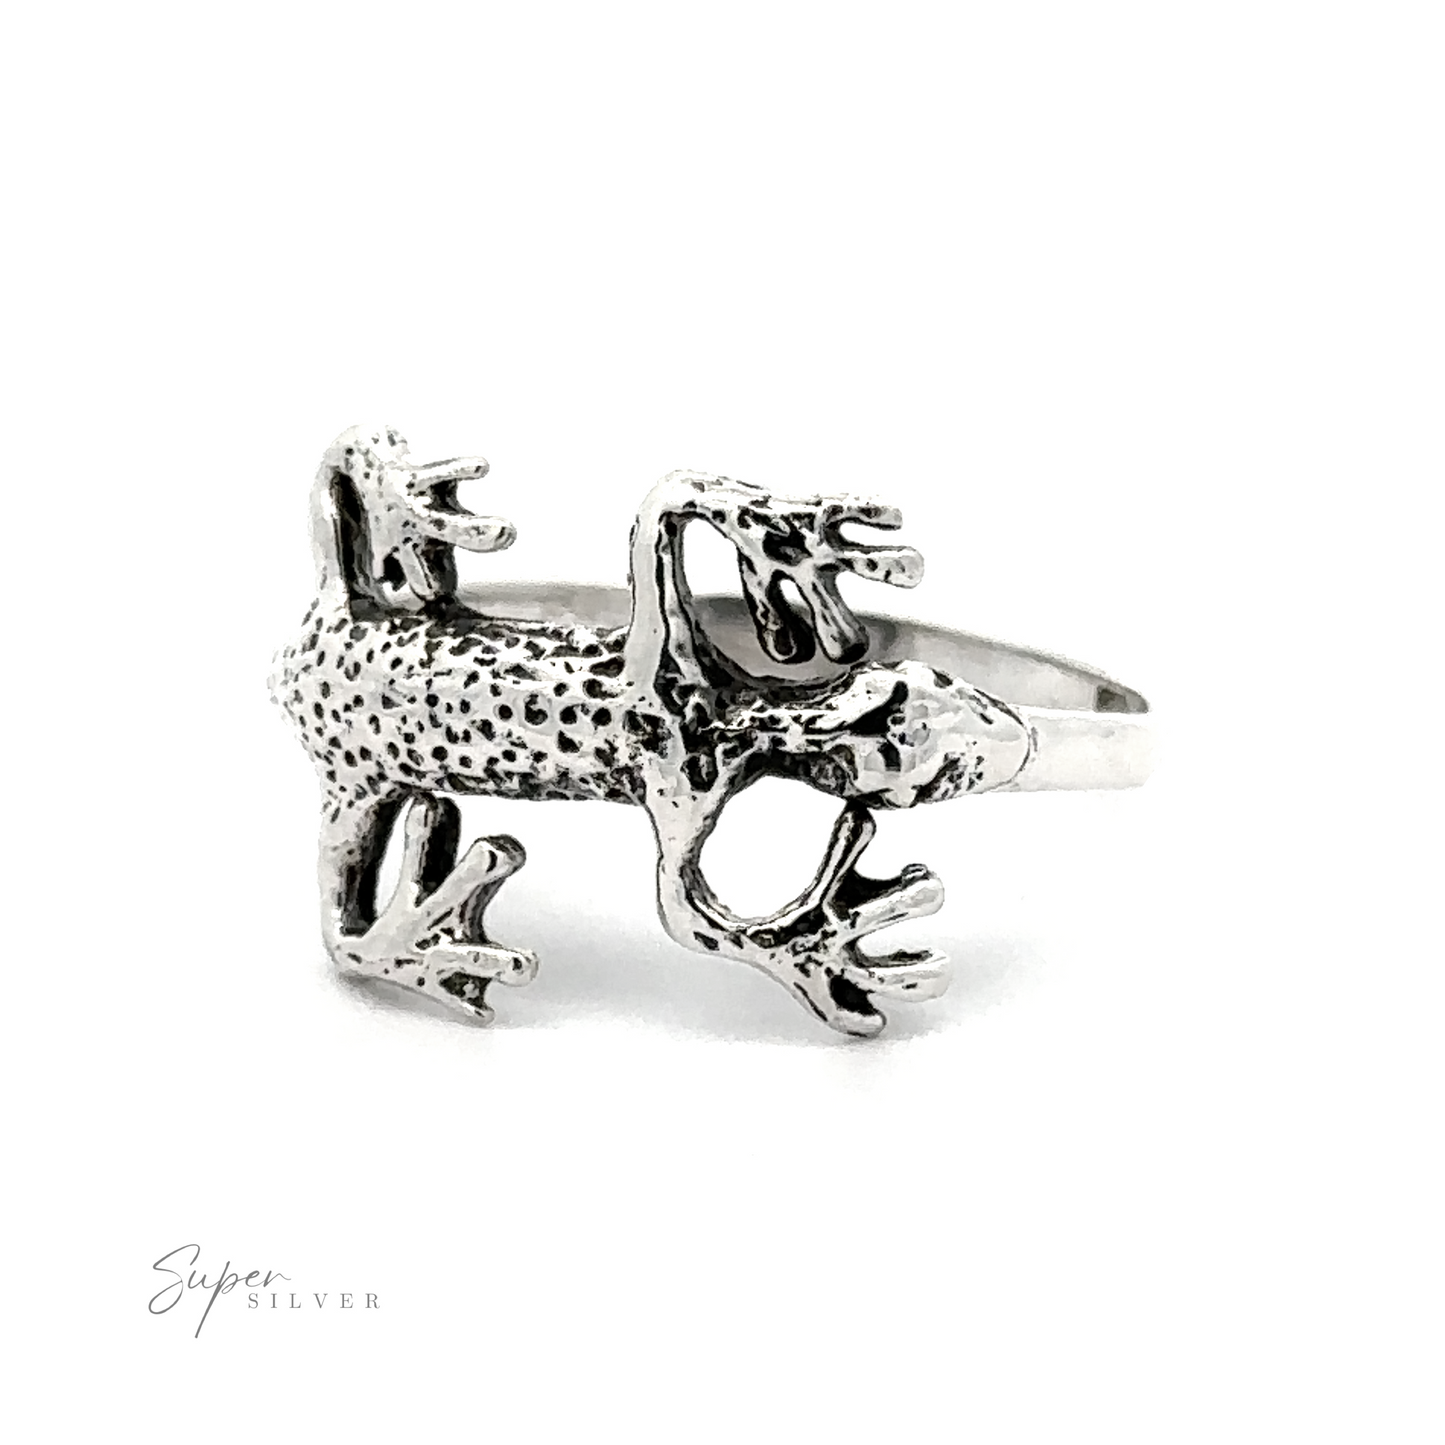 A Lizard Ring, perfect for everyday wear.